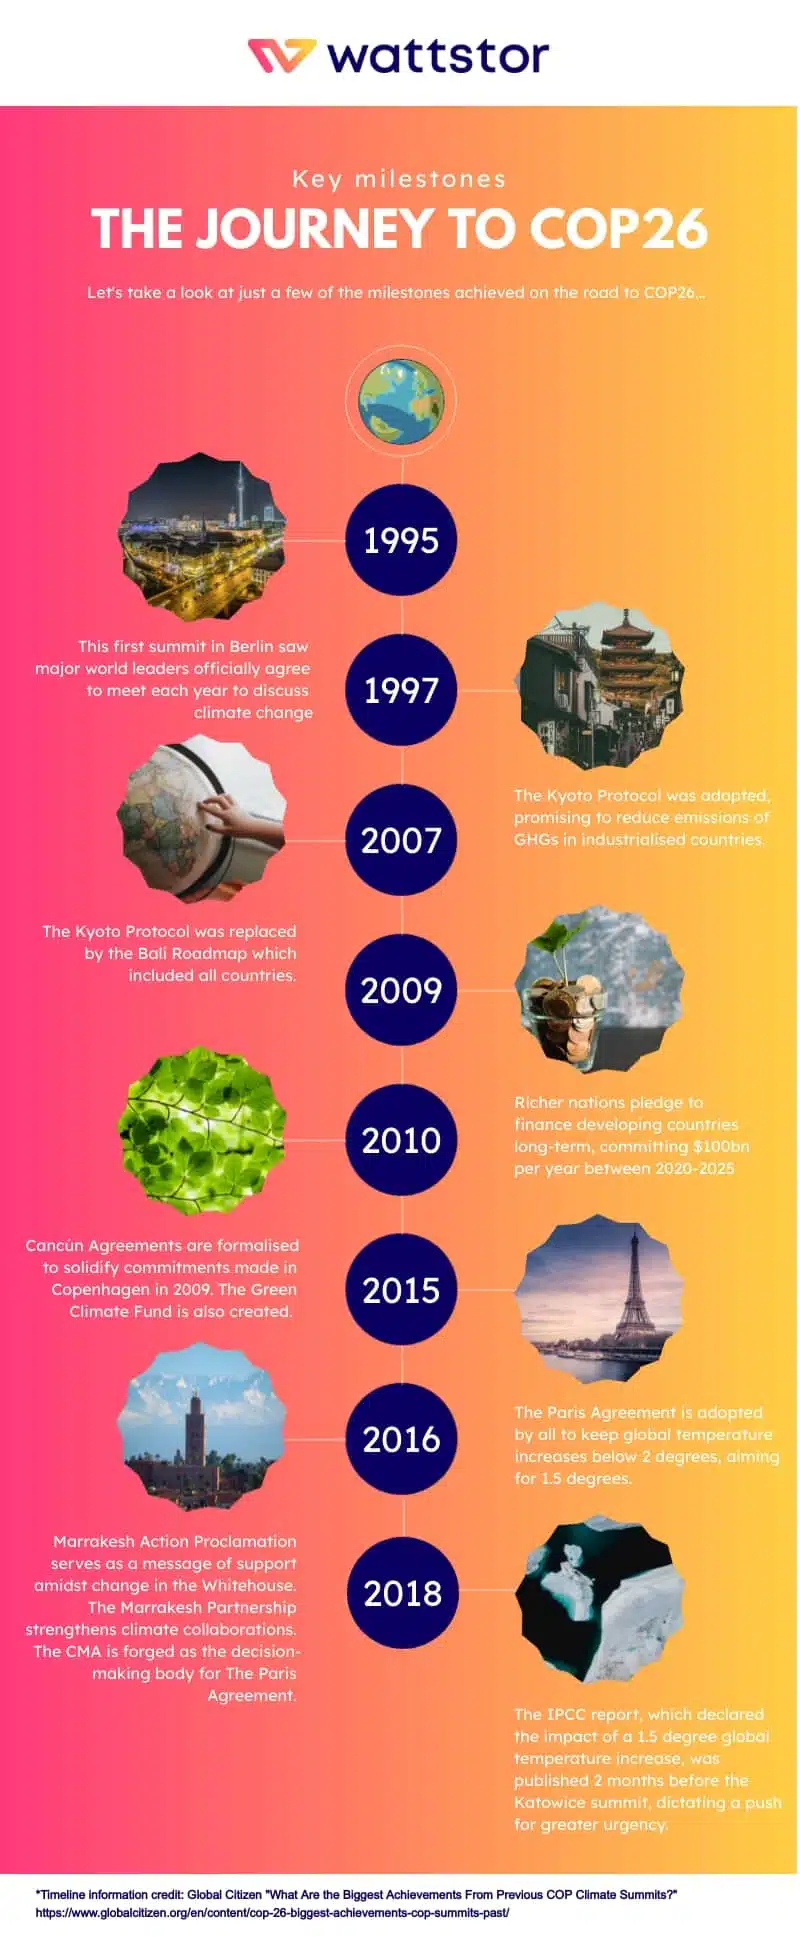 A timeline showing the milestones prior to COP26